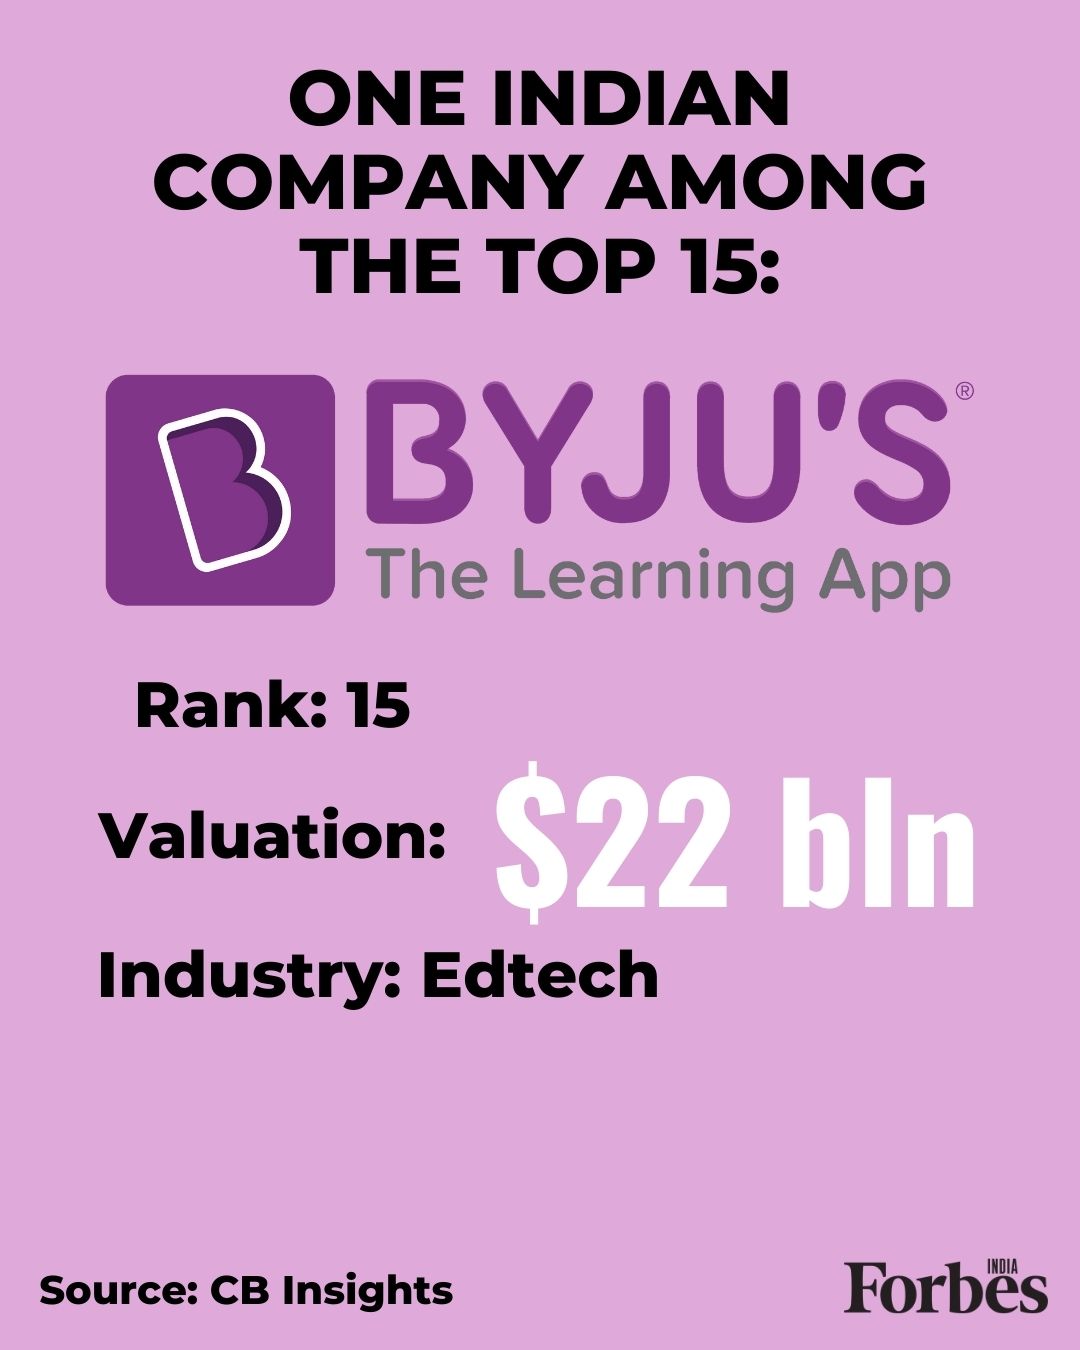 ByteDance highest-valued unicorn in the world; BYJU's among top 15